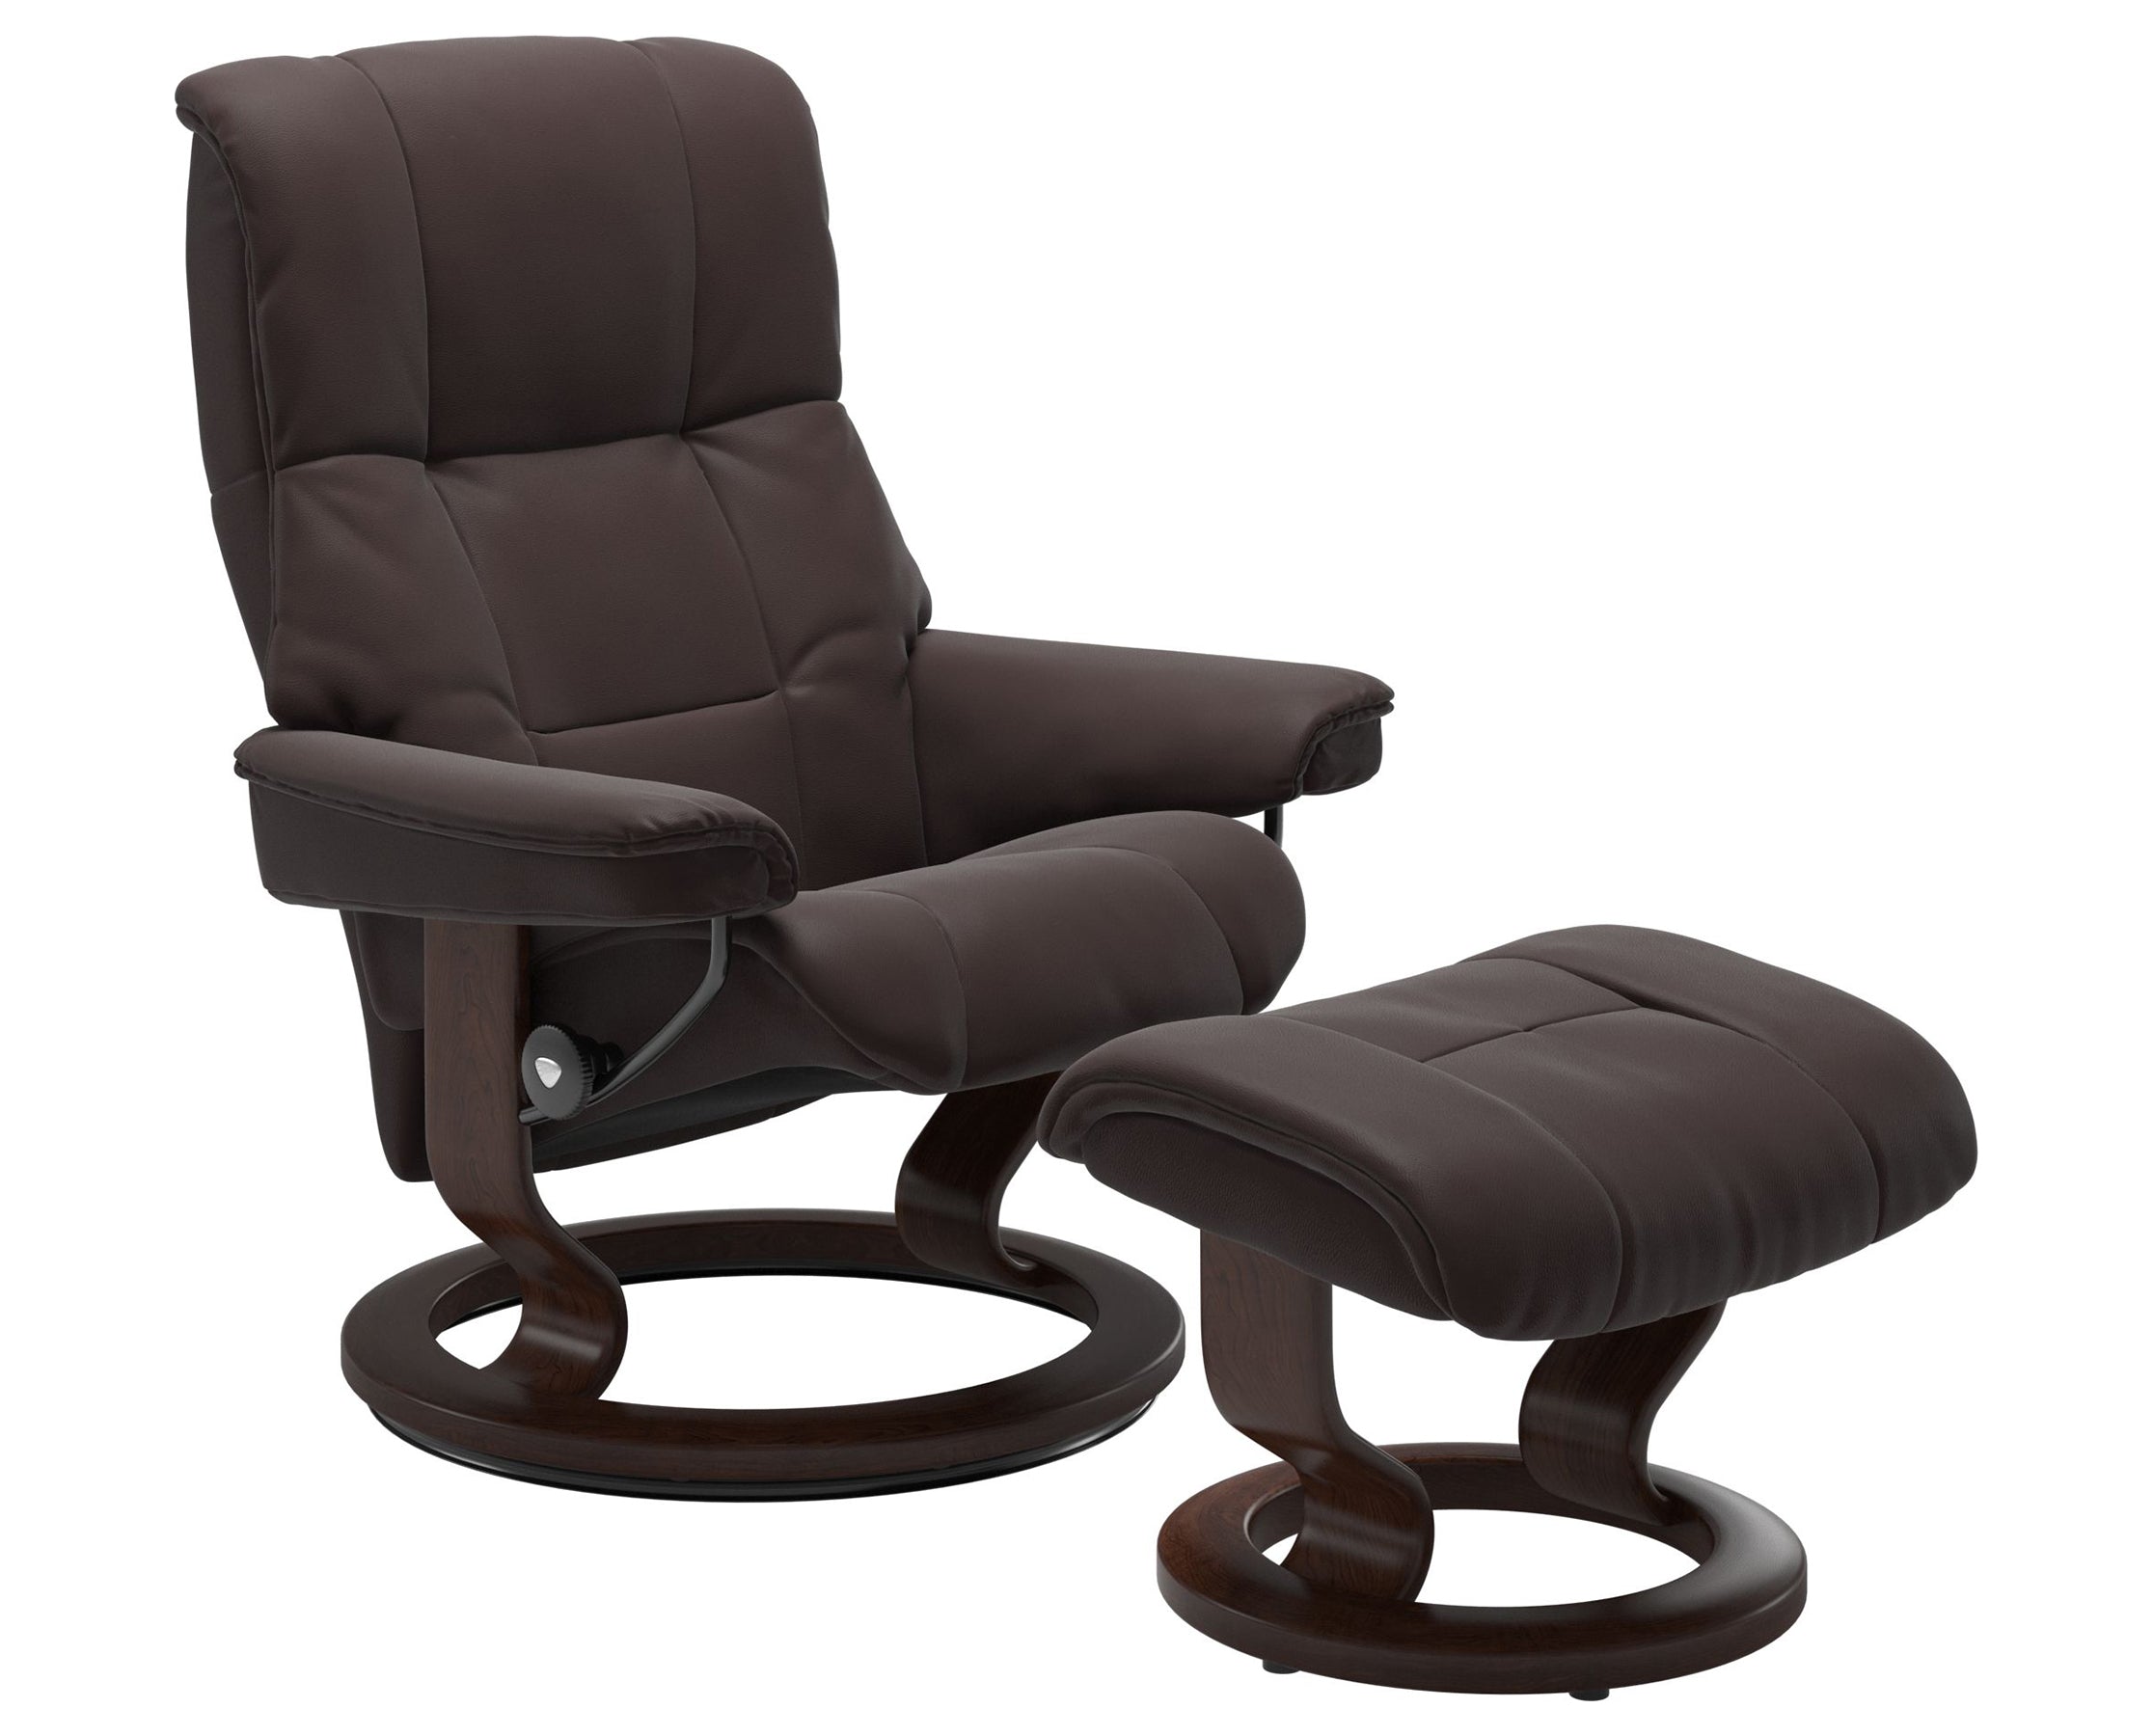 Paloma Leather Chocolate M &amp; Brown Base | Stressless Mayfair Classic Recliner - Promo | Valley Ridge Furniture